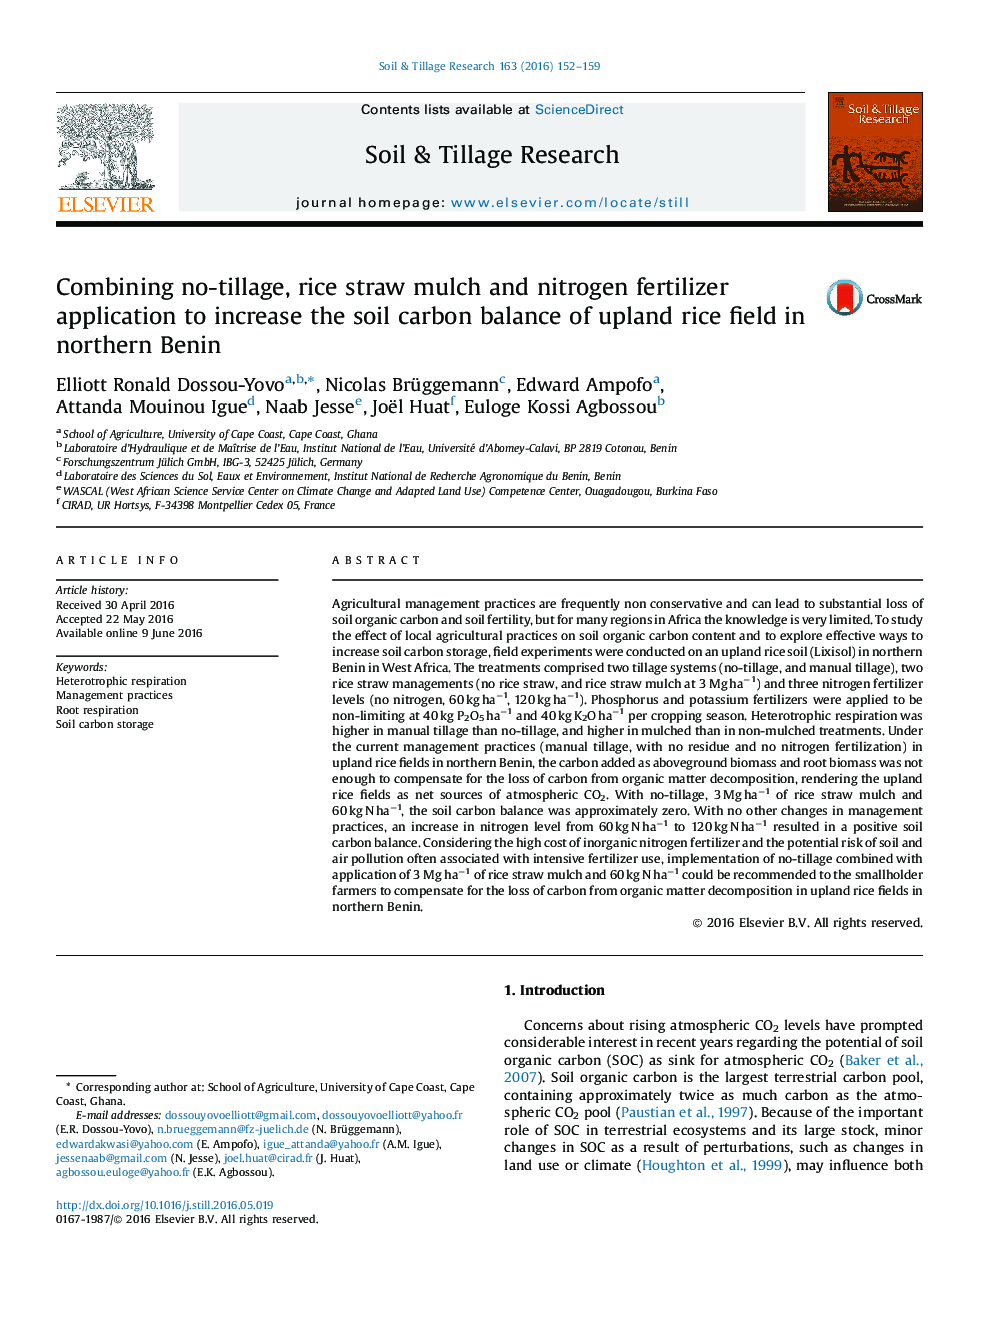 Combining no-tillage, rice straw mulch and nitrogen fertilizer application to increase the soil carbon balance of upland rice field in northern Benin